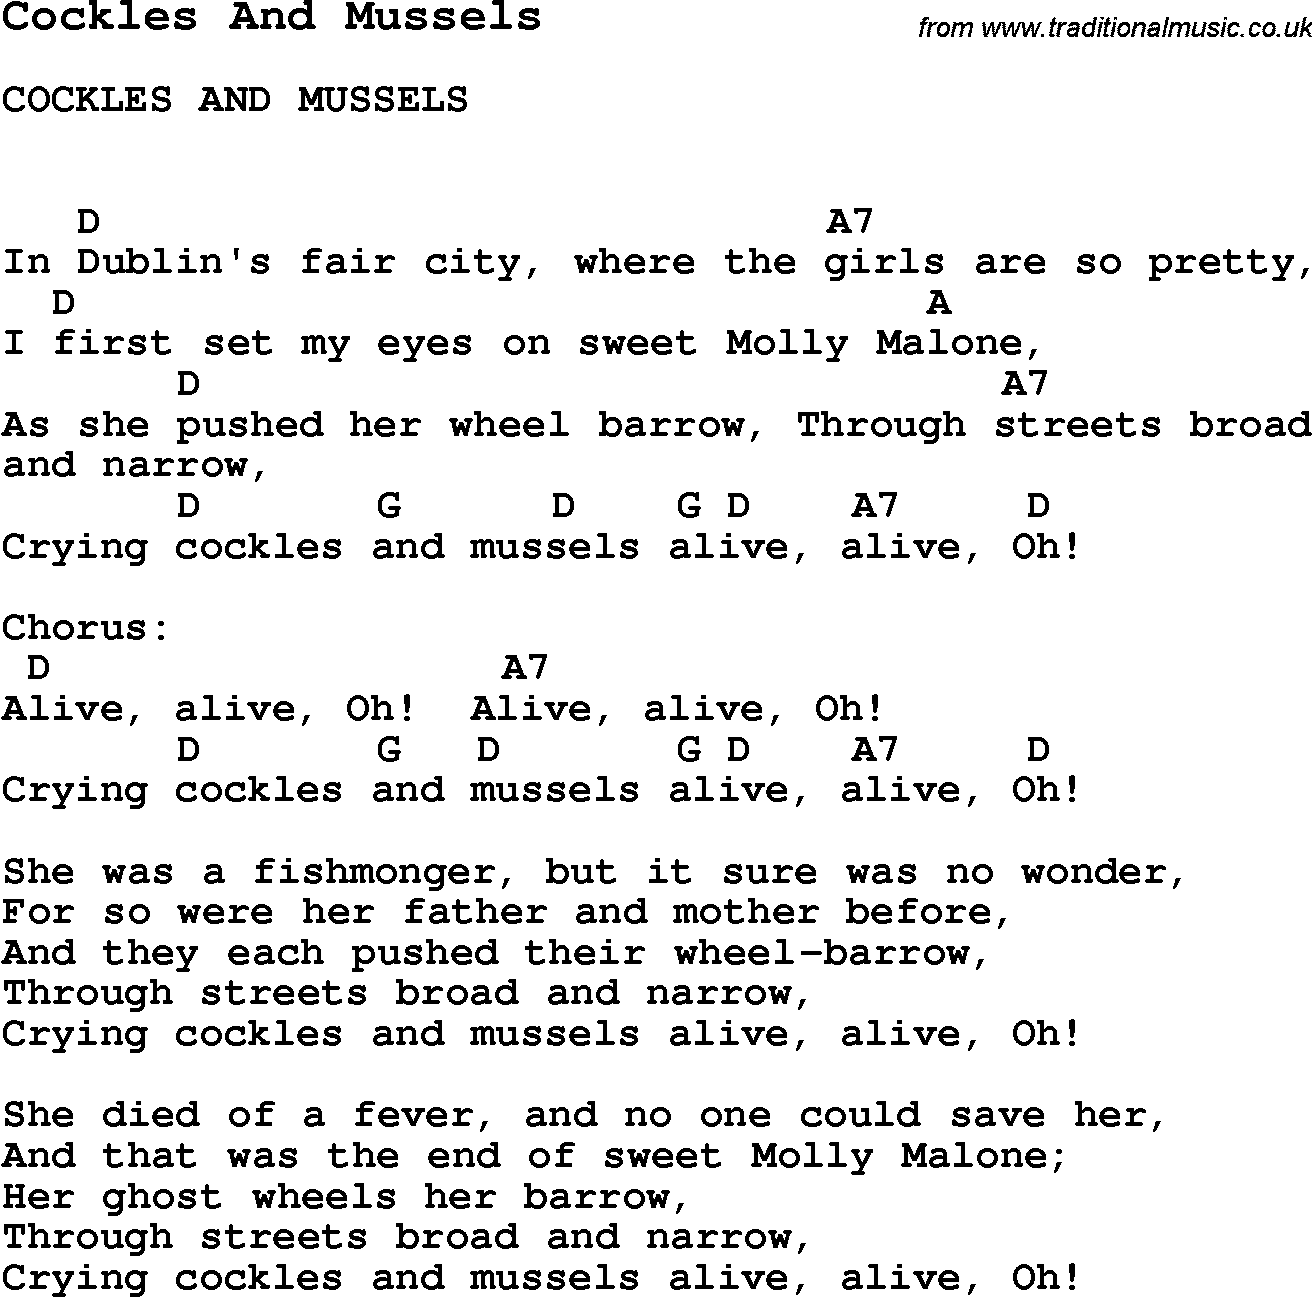 Summer-Camp Song, Cockles And Mussels, with lyrics and chords for Ukulele, Guitar Banjo etc.